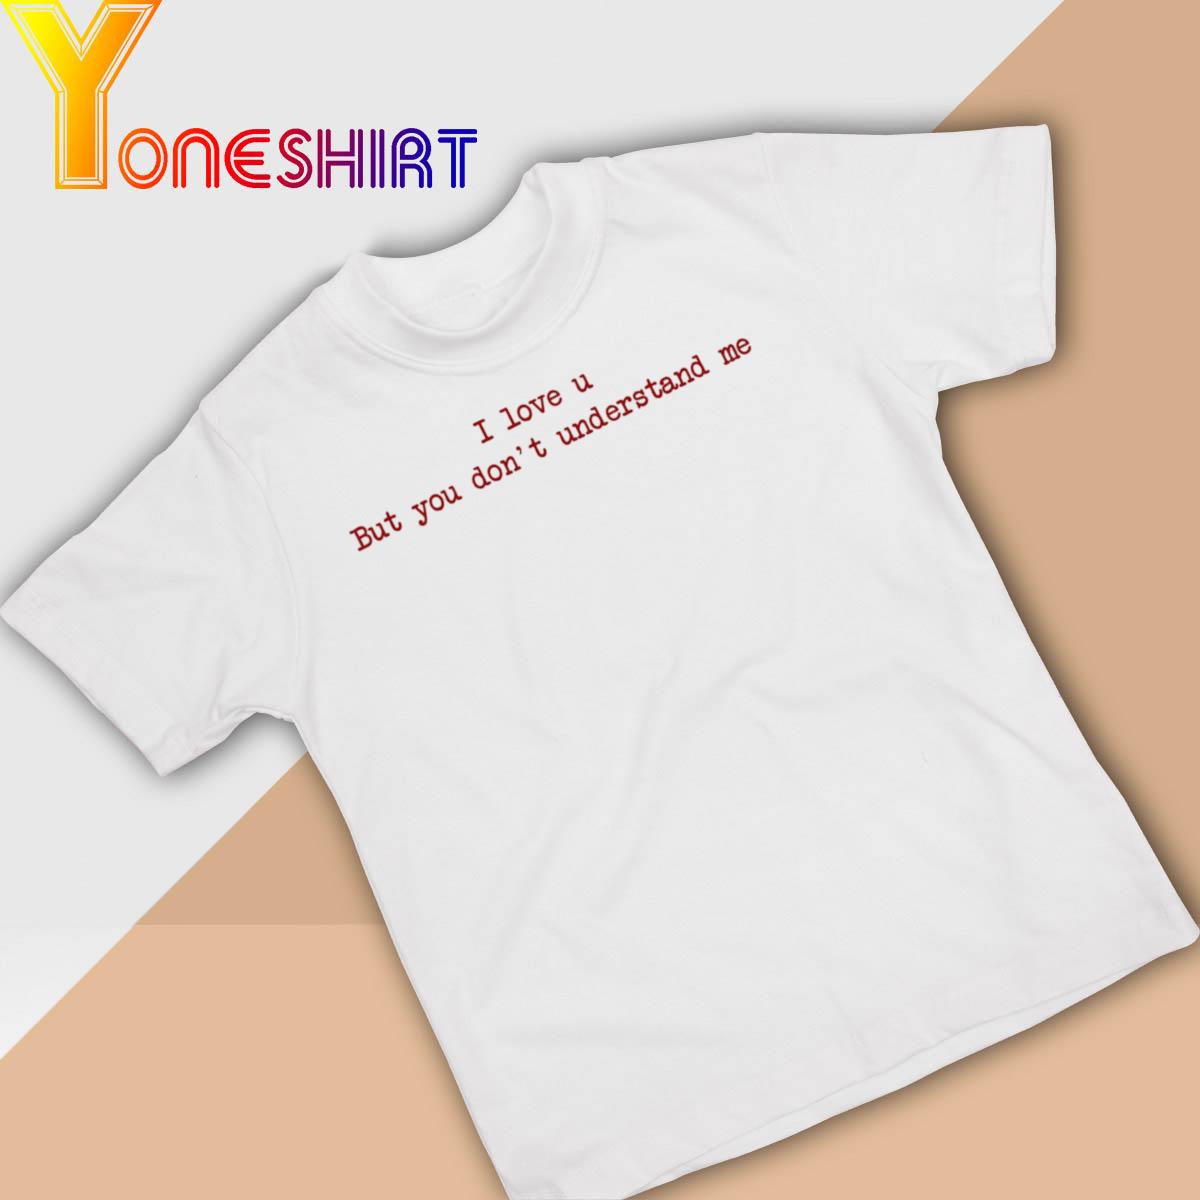 I Love U But You don't Understand me shirt